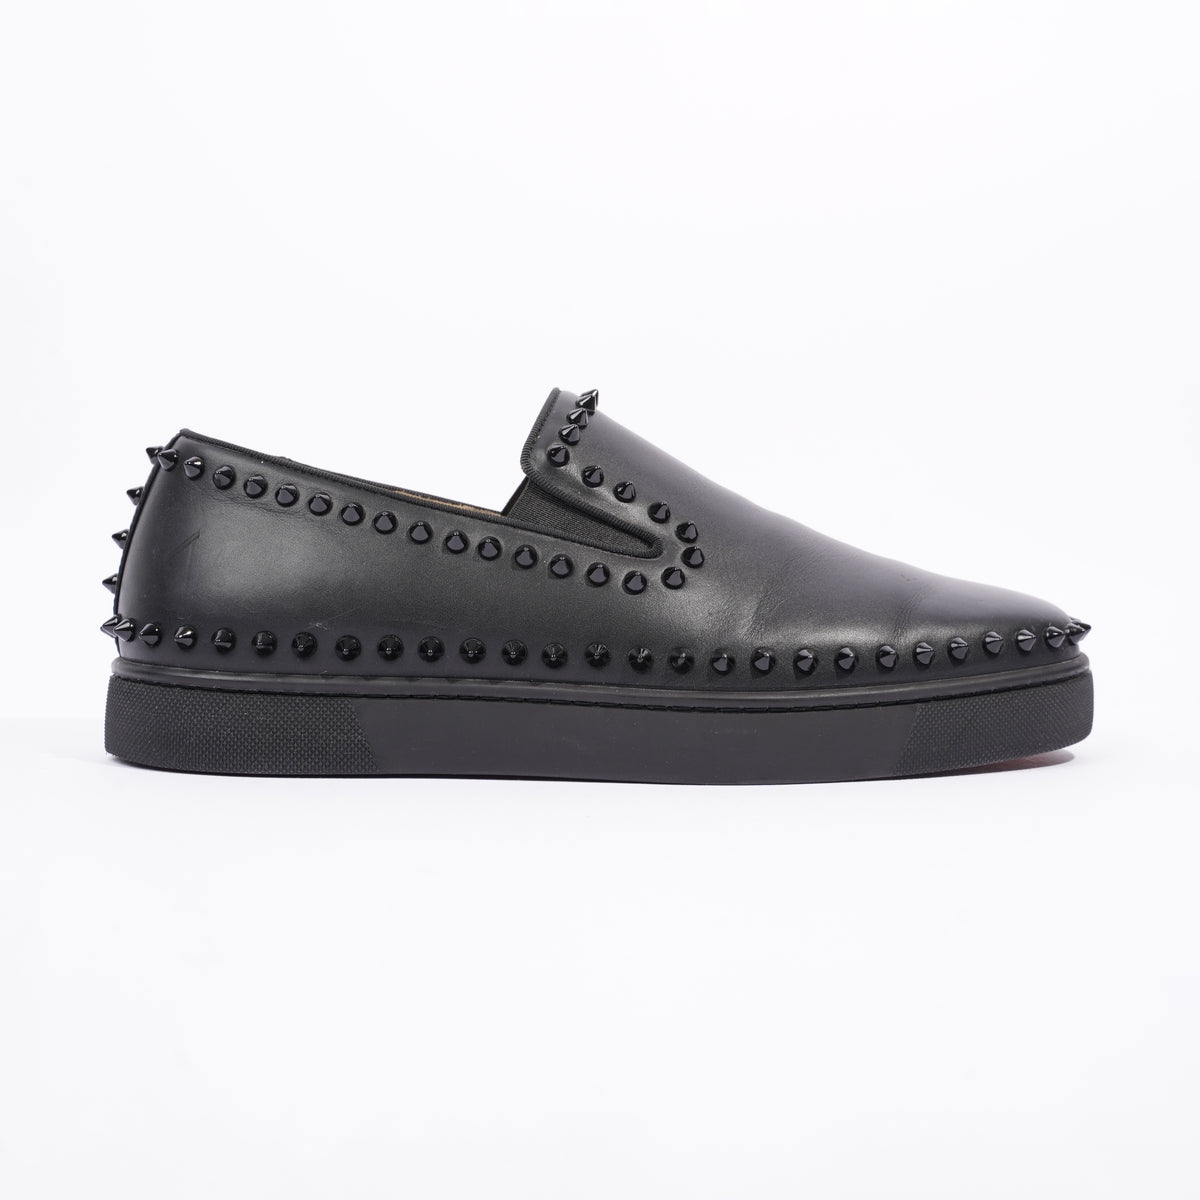 Buy Louis Philippe Men Black PU Boat Shoes at Redfynd